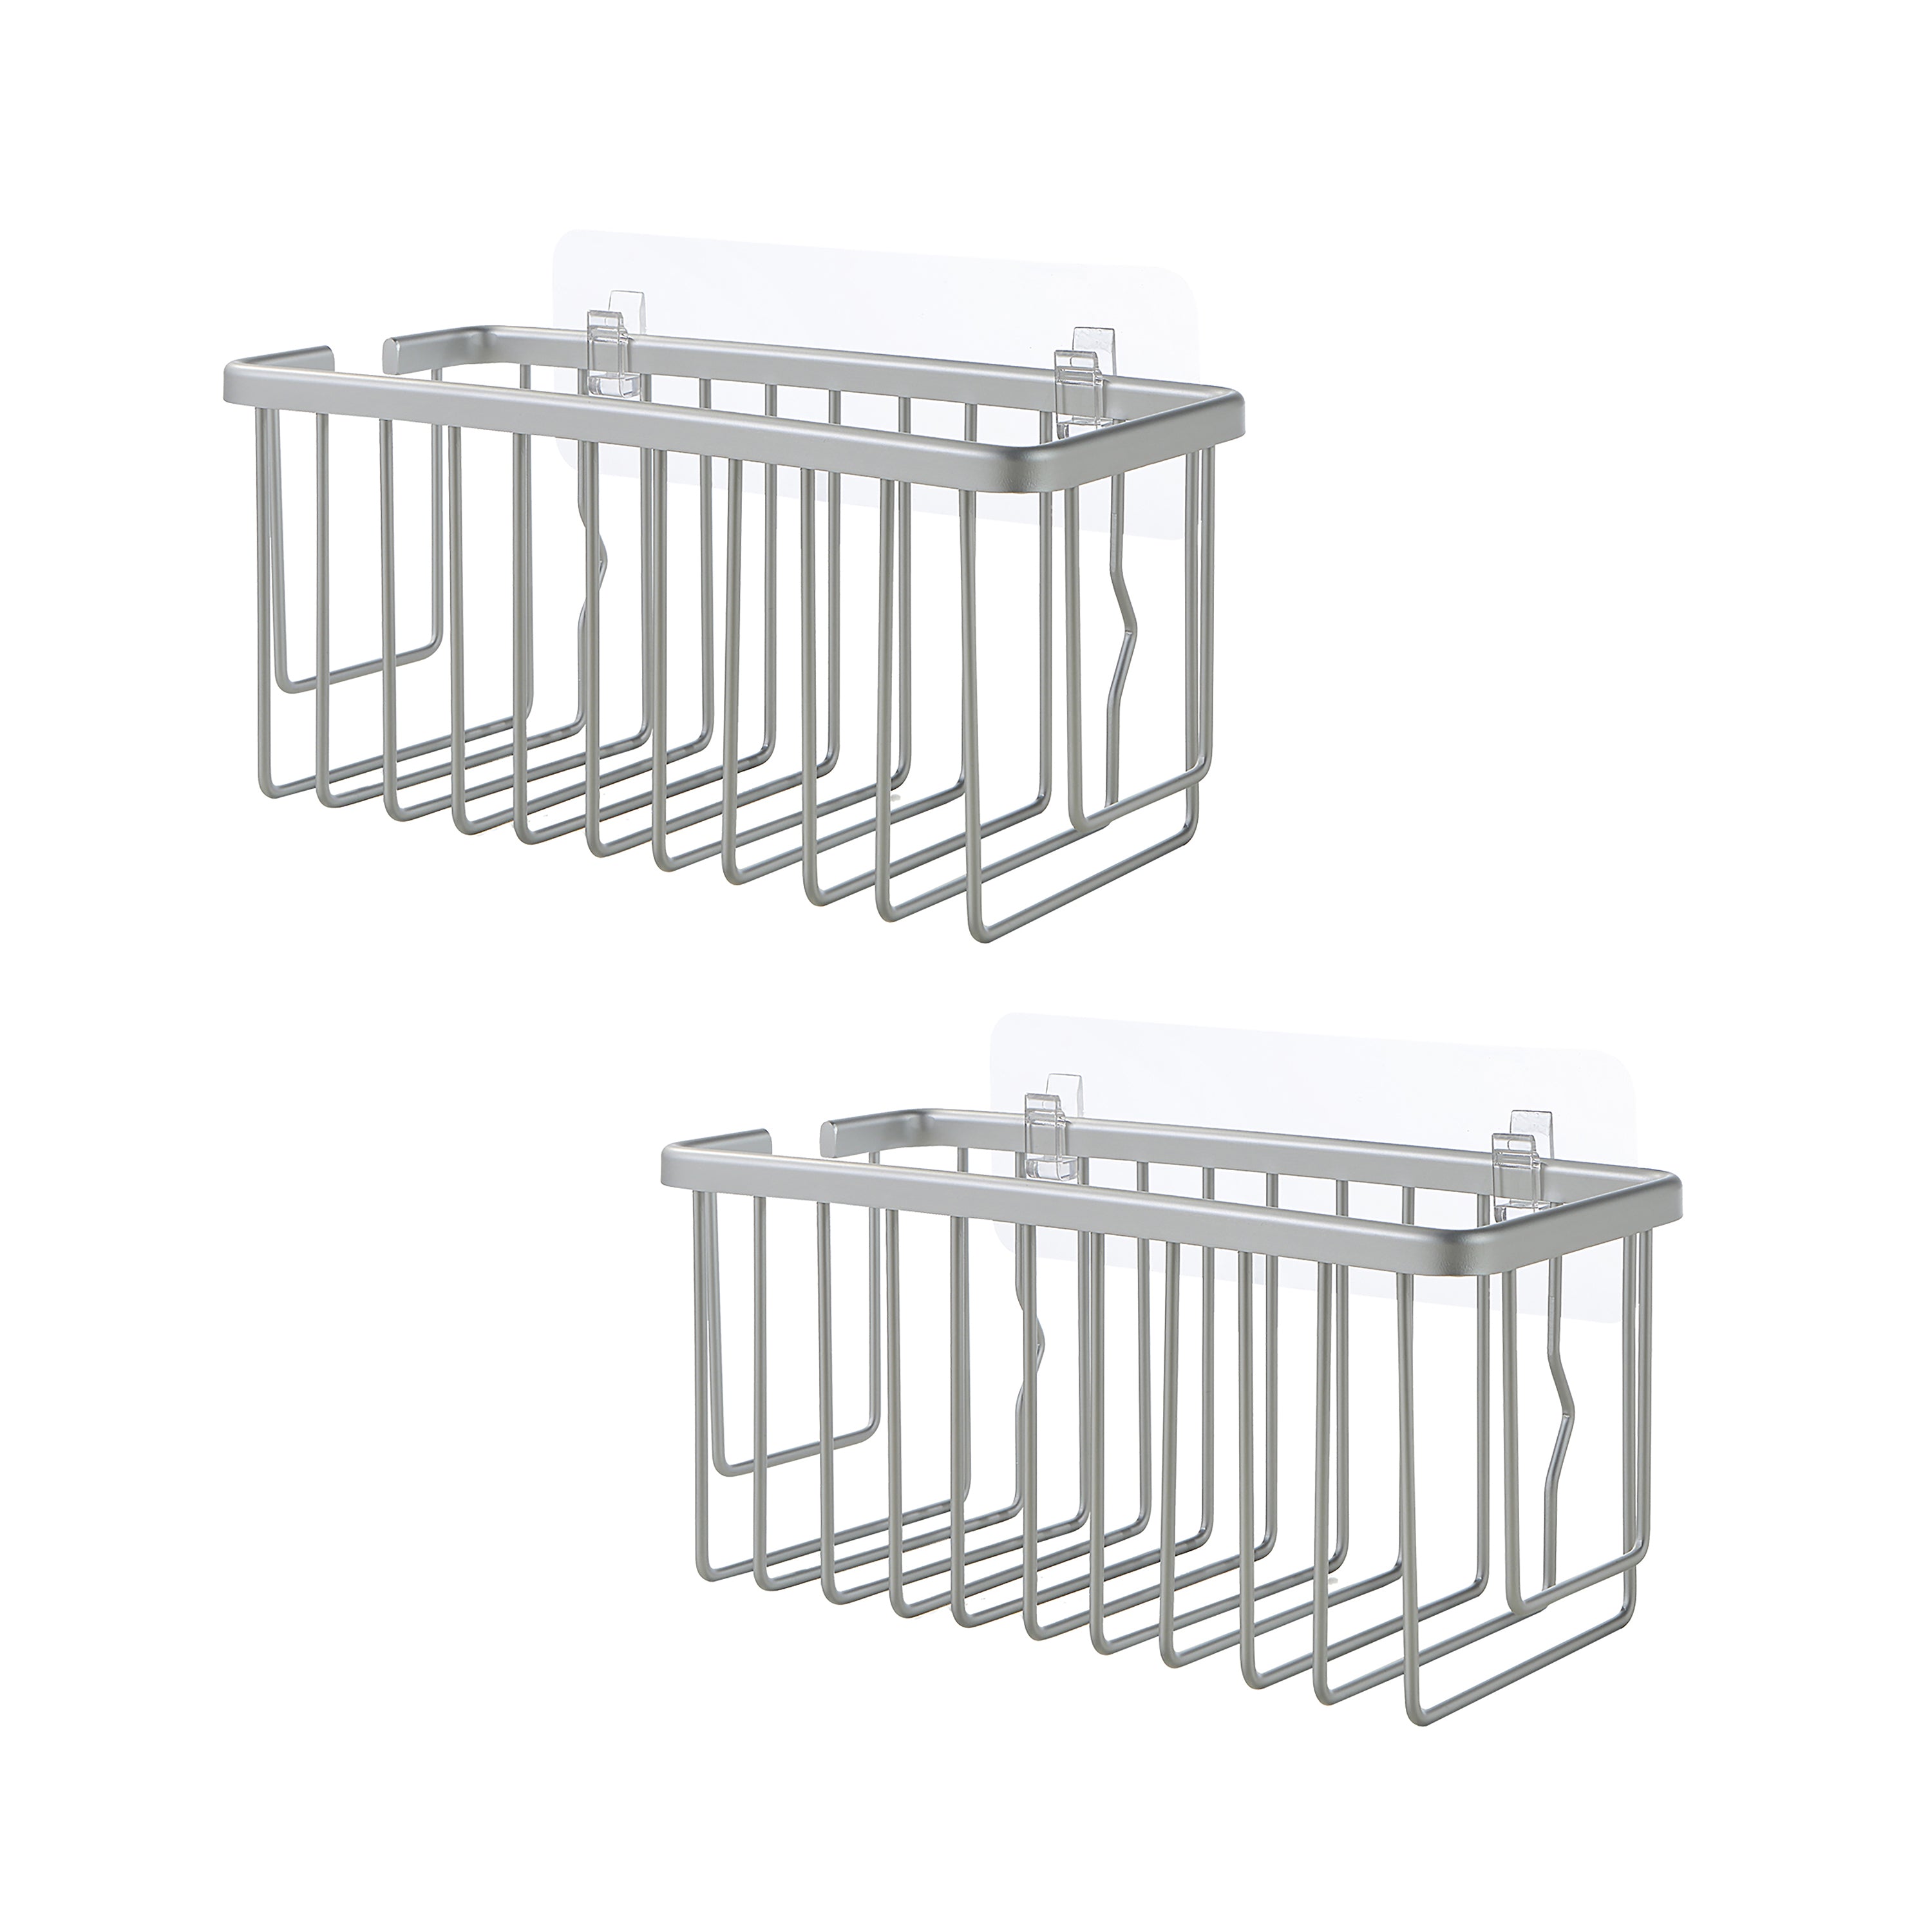 SunnyPoint NeverRust Aluminum Shower Caddy Basket Organizer Storage Rack,  Removable Adhesive Pad; No Drilling for Bathroom, Kitchen (Set of 2, Black)